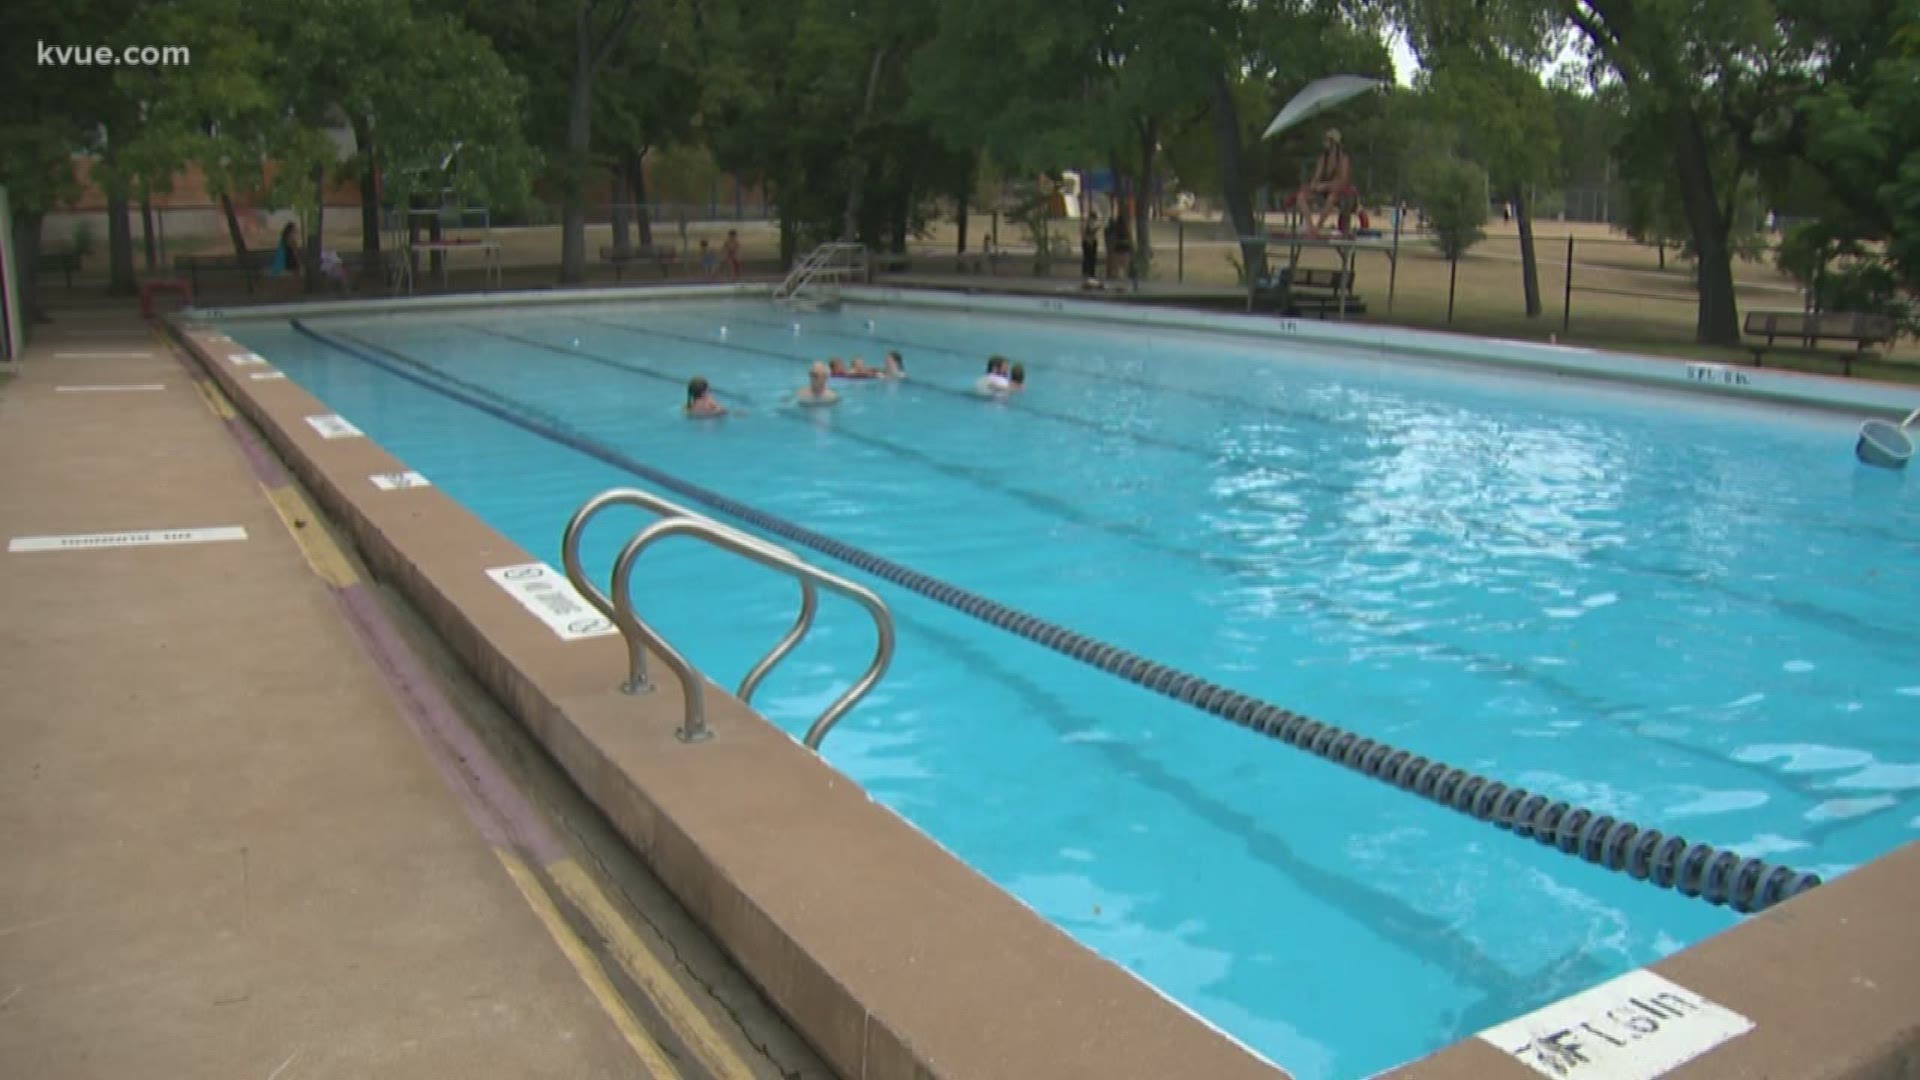 School swim facility could open for Georgetown residents